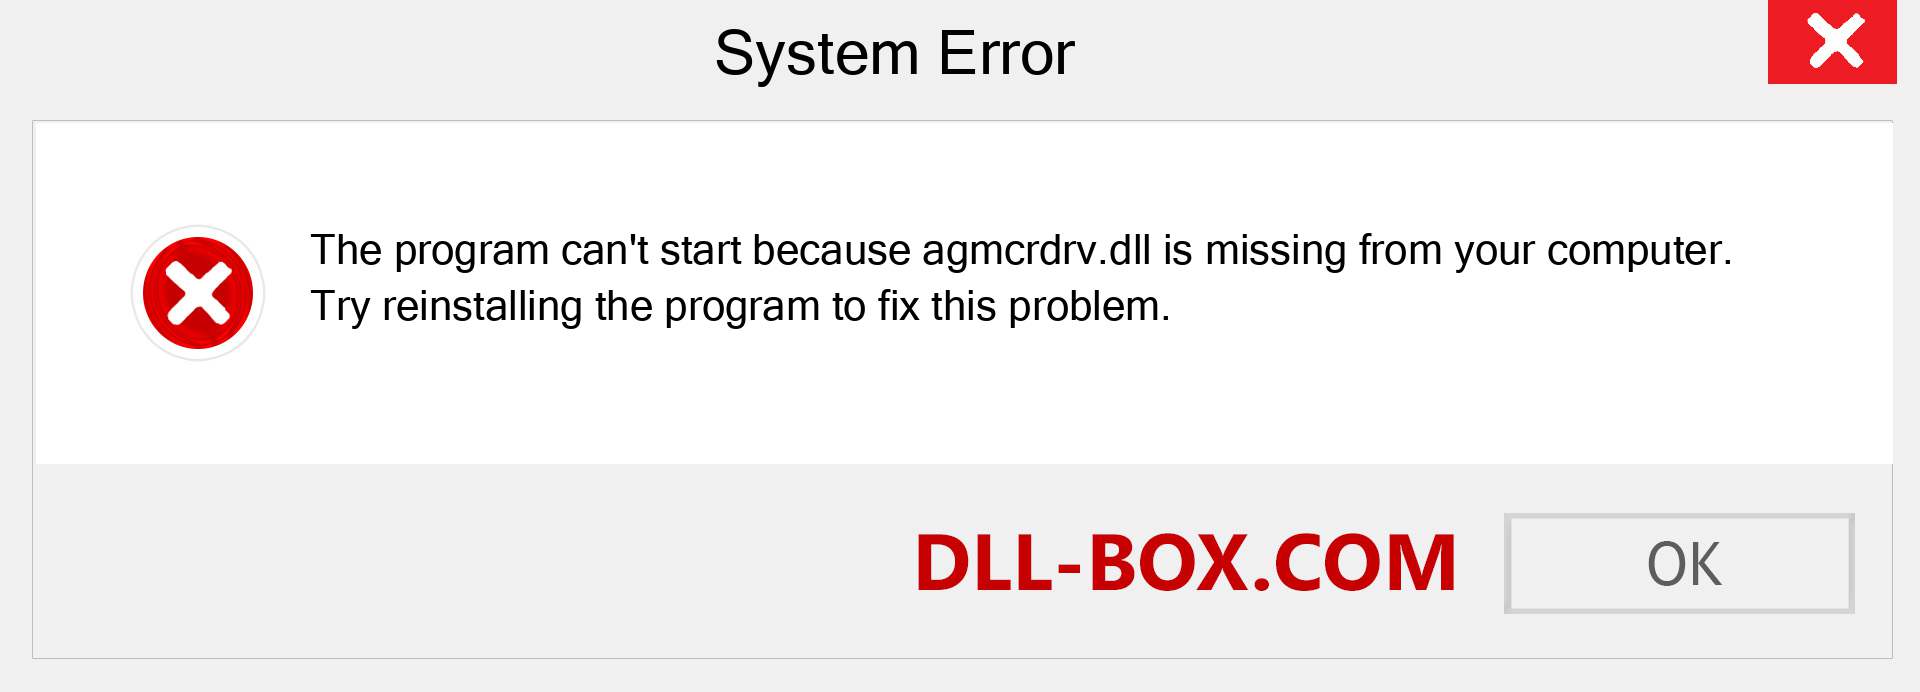  agmcrdrv.dll file is missing?. Download for Windows 7, 8, 10 - Fix  agmcrdrv dll Missing Error on Windows, photos, images